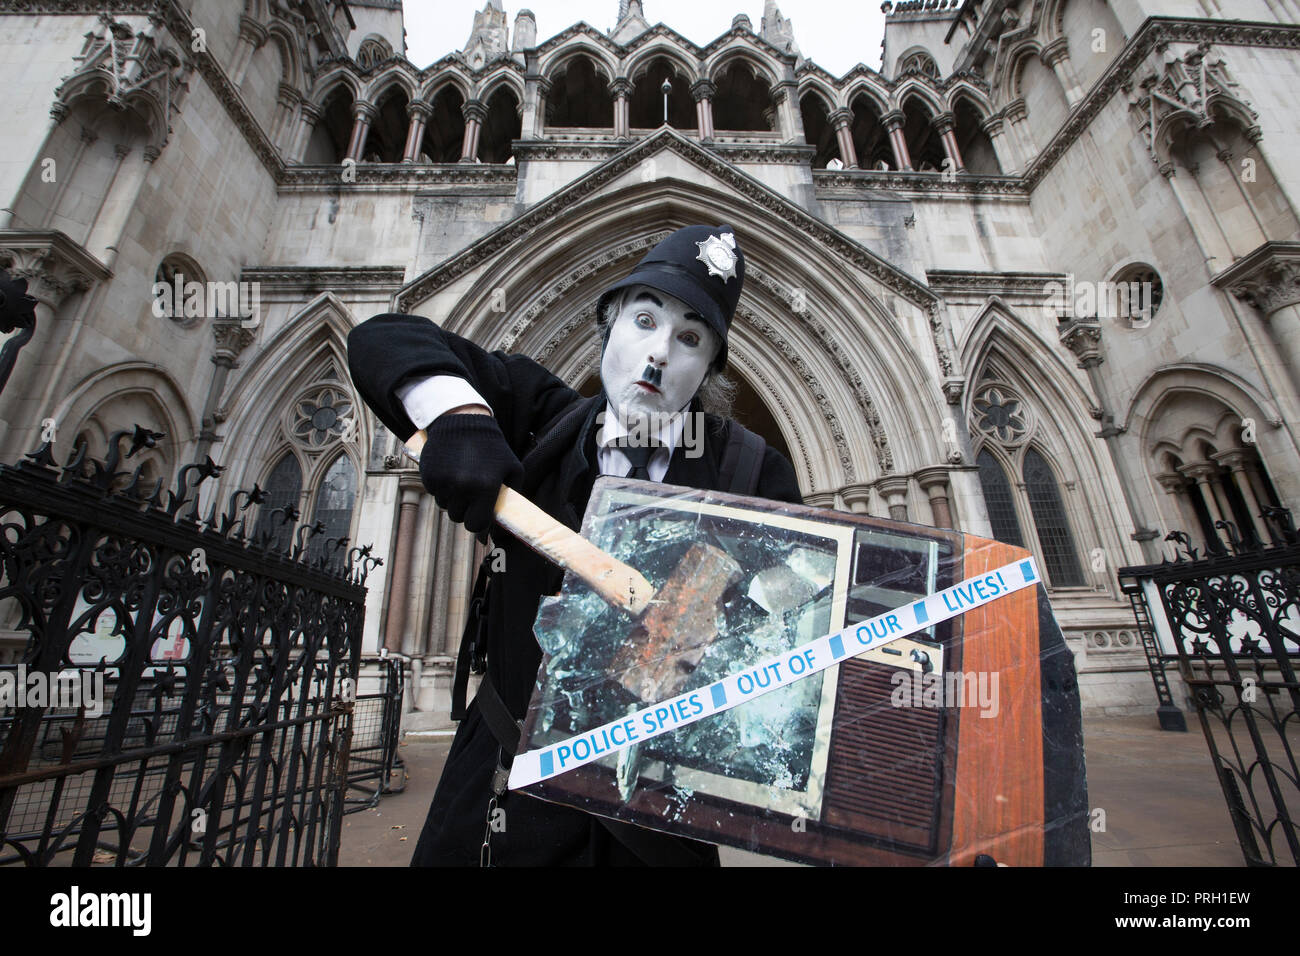 London, UK. 3rd Oct 2018. Protester Against Undercover Police Officers outside High Court, Royal Courts of Justice, London, UK 3rd October 2018. The public have been shocked that women have been deceived into intimate relationships with undercover police officers in the United Kingdom. One woman is bringing a case about the human rights abuses she suffered in her relationship with undercover police officer Mark Kennedy while he infiltrated social and enviromental campaign groups. Credit: Jeff Gilbert/Alamy Live News Stock Photo